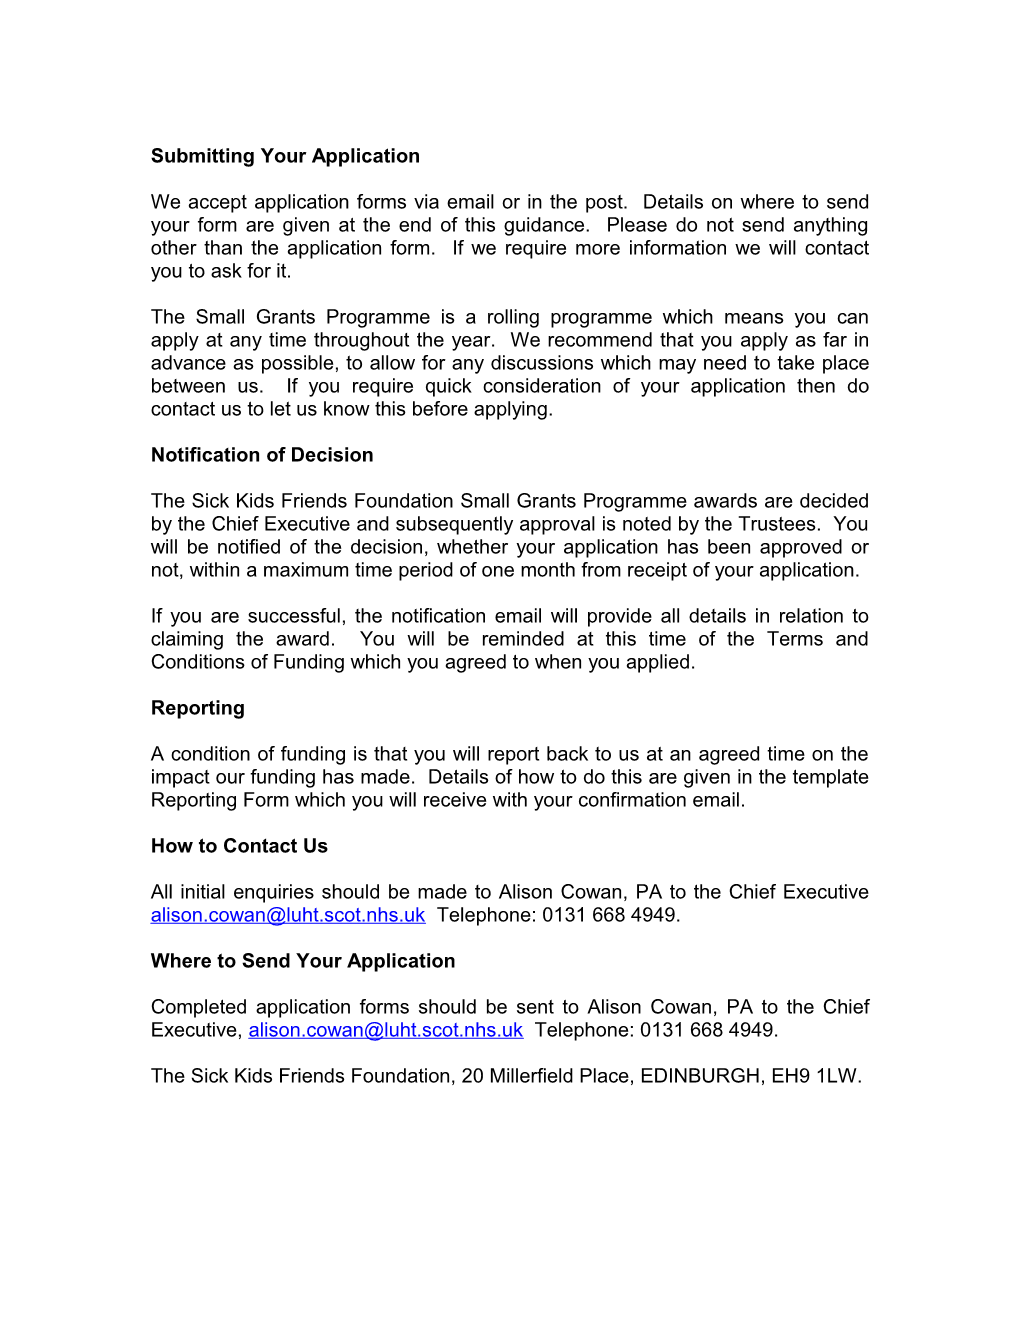 The Sick Kids Friends Foundation Small Grants Programme Application Guidance